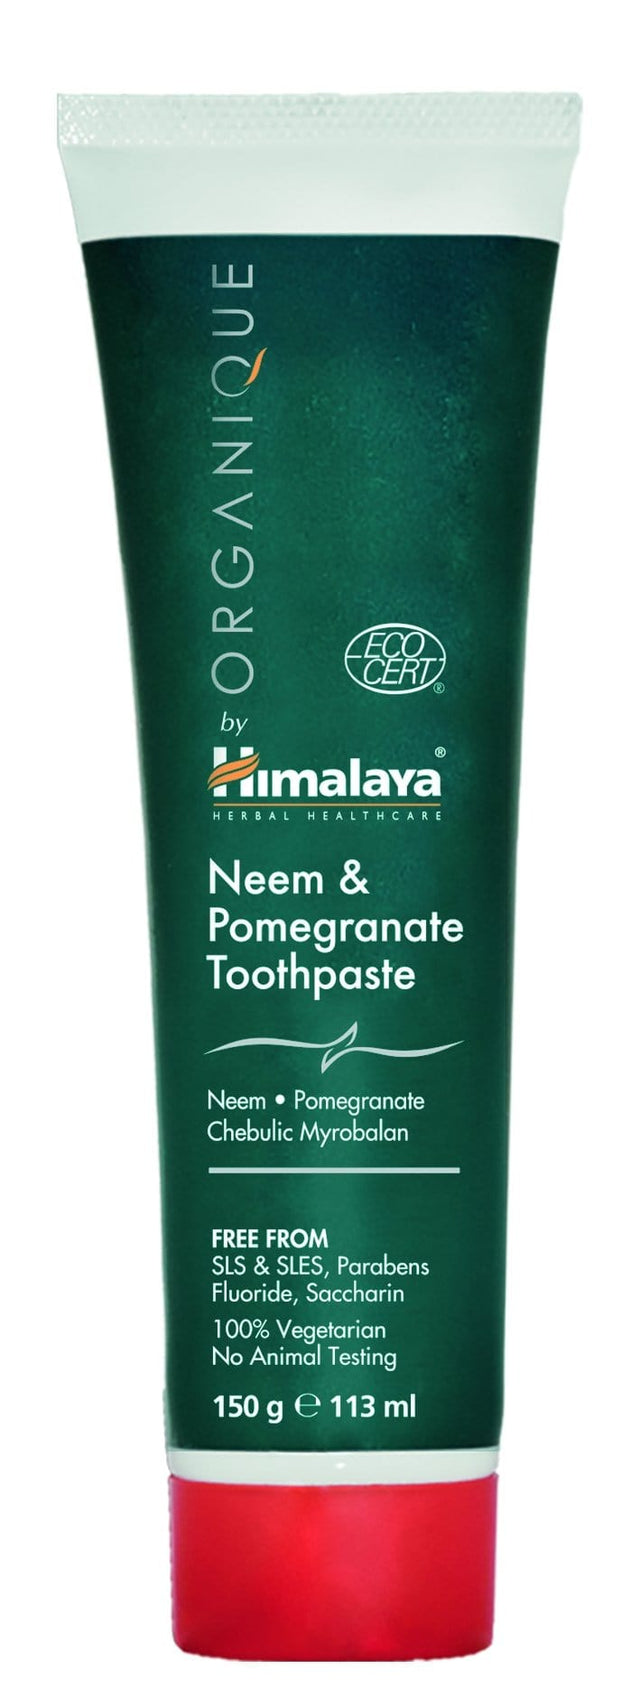 Himalaya Neem and Pomegranate Toothpaste, 150gr